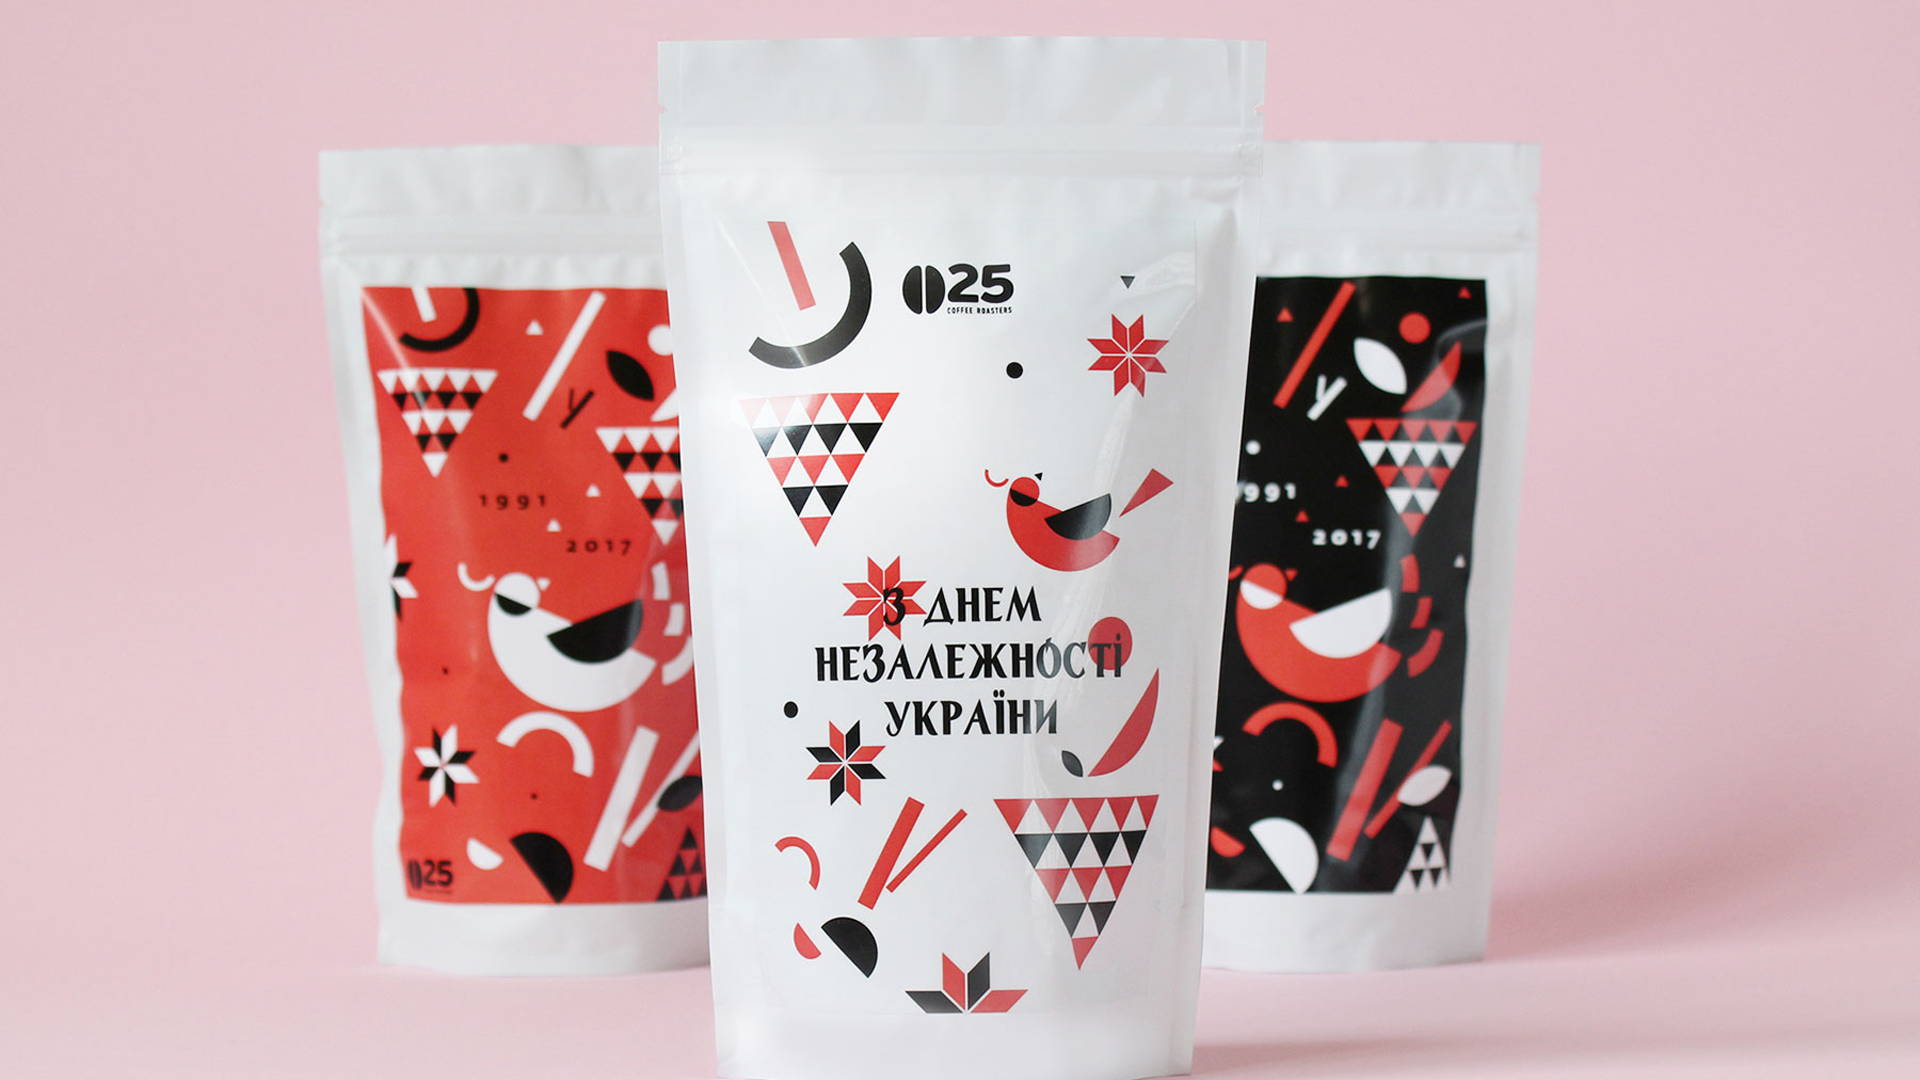 Featured image for This Coffee Celebrates Ukrainian Independence in a Playful Way